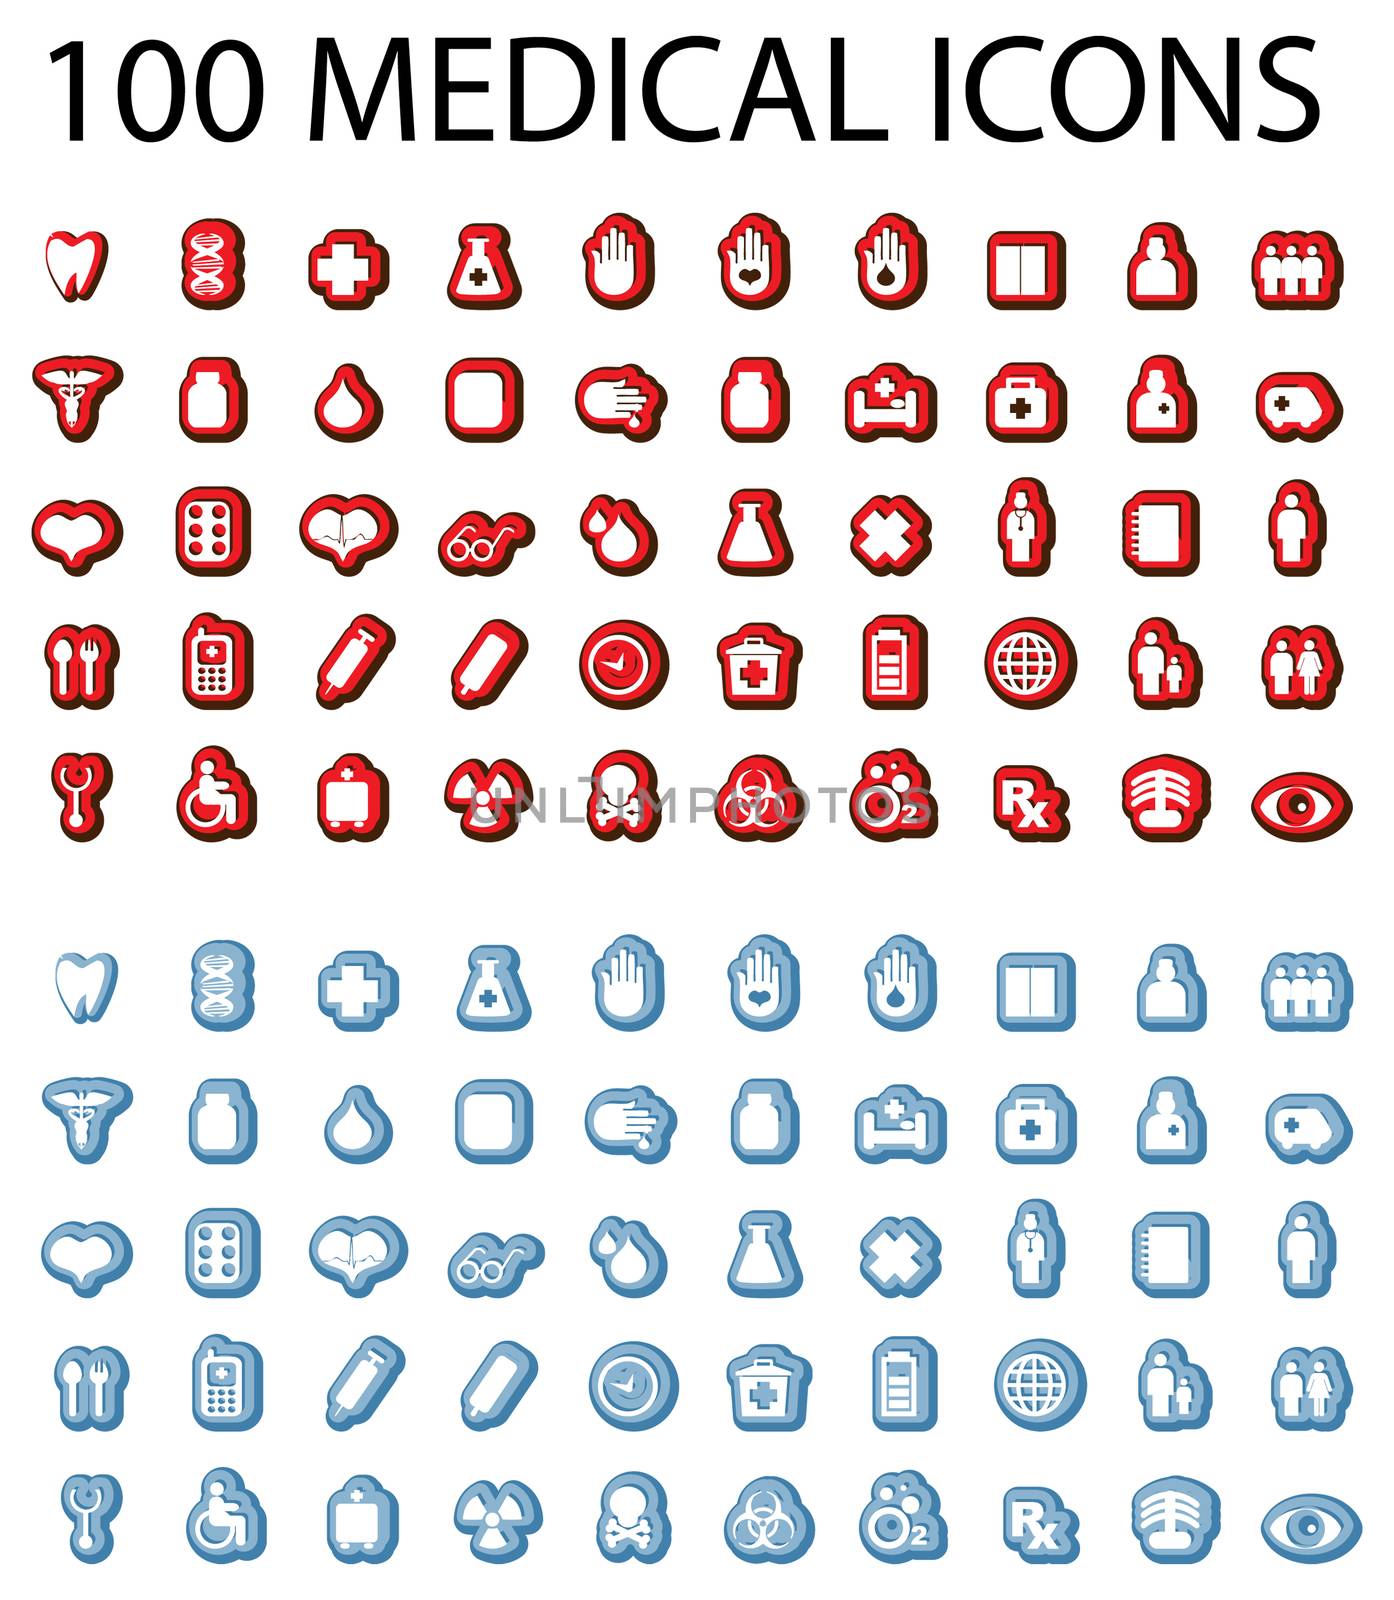 100 Medical icons set, blue and red stickers, emblem